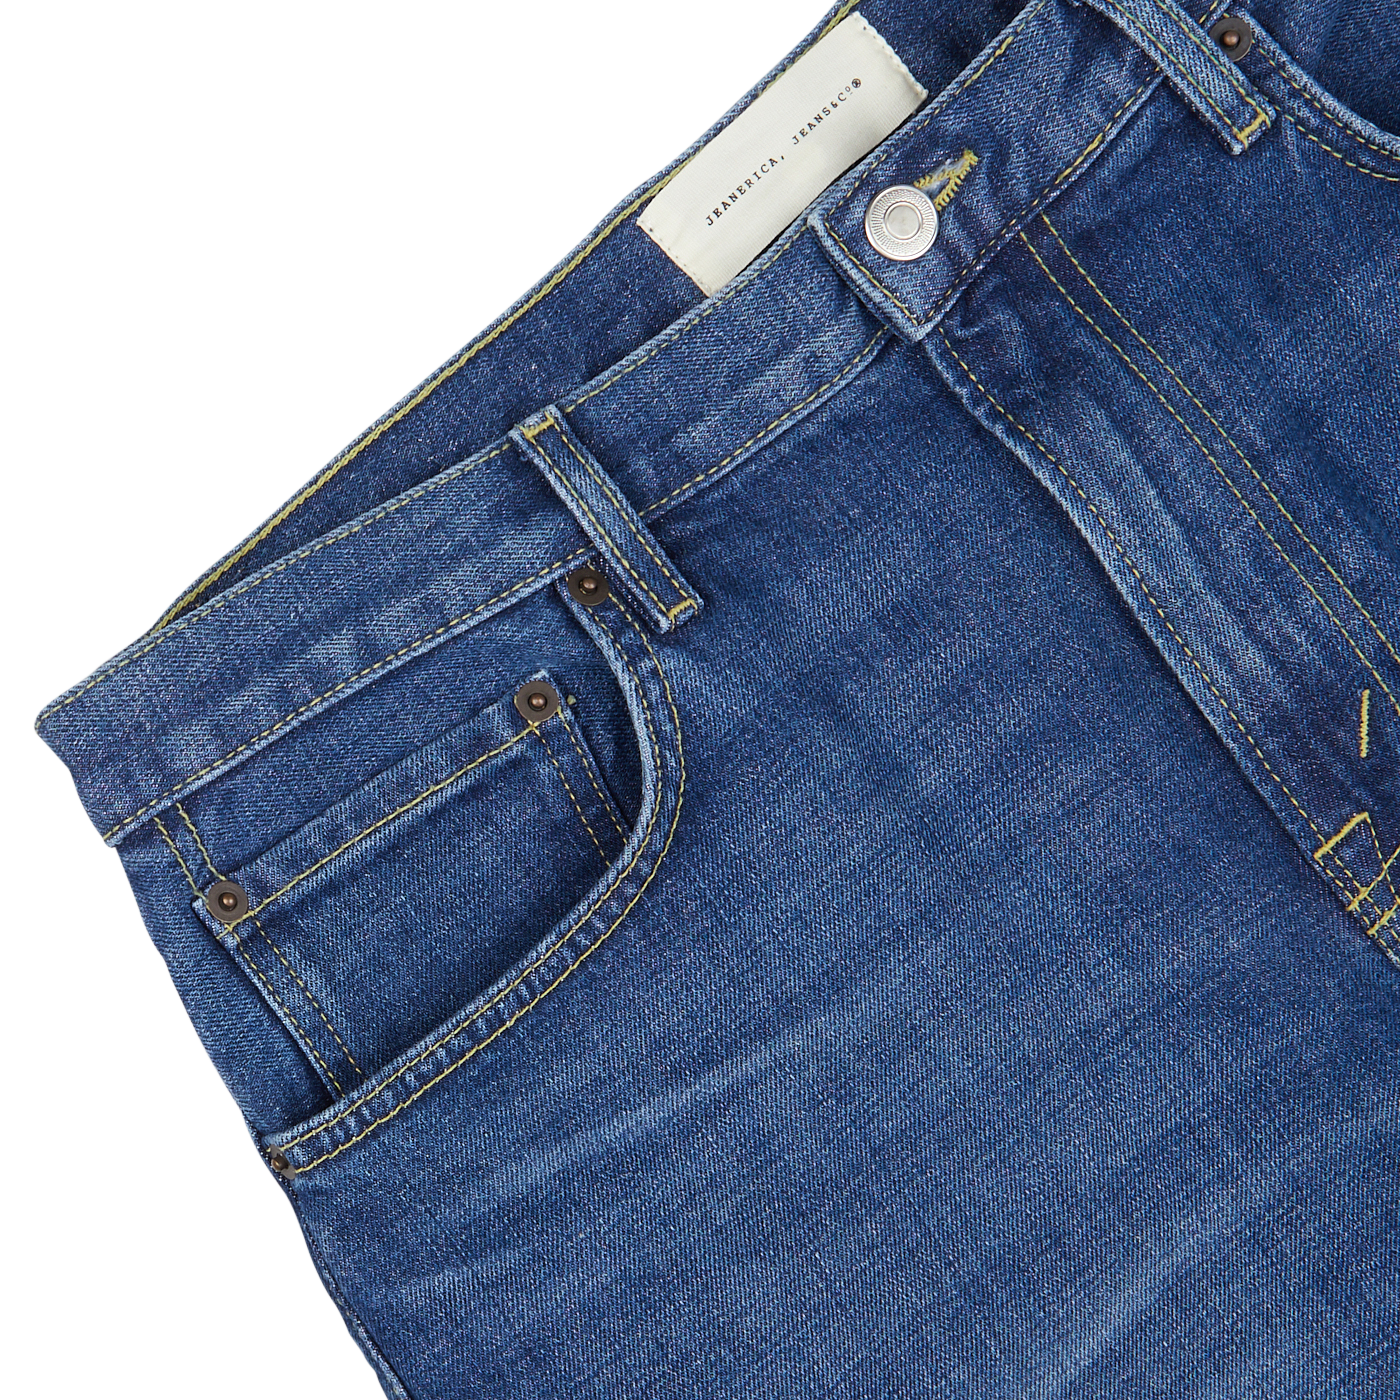 Close-up of Jeanerica's Medium Blue Washed Cotton TM005 Jeans with a focus on the front pocket and waistband.